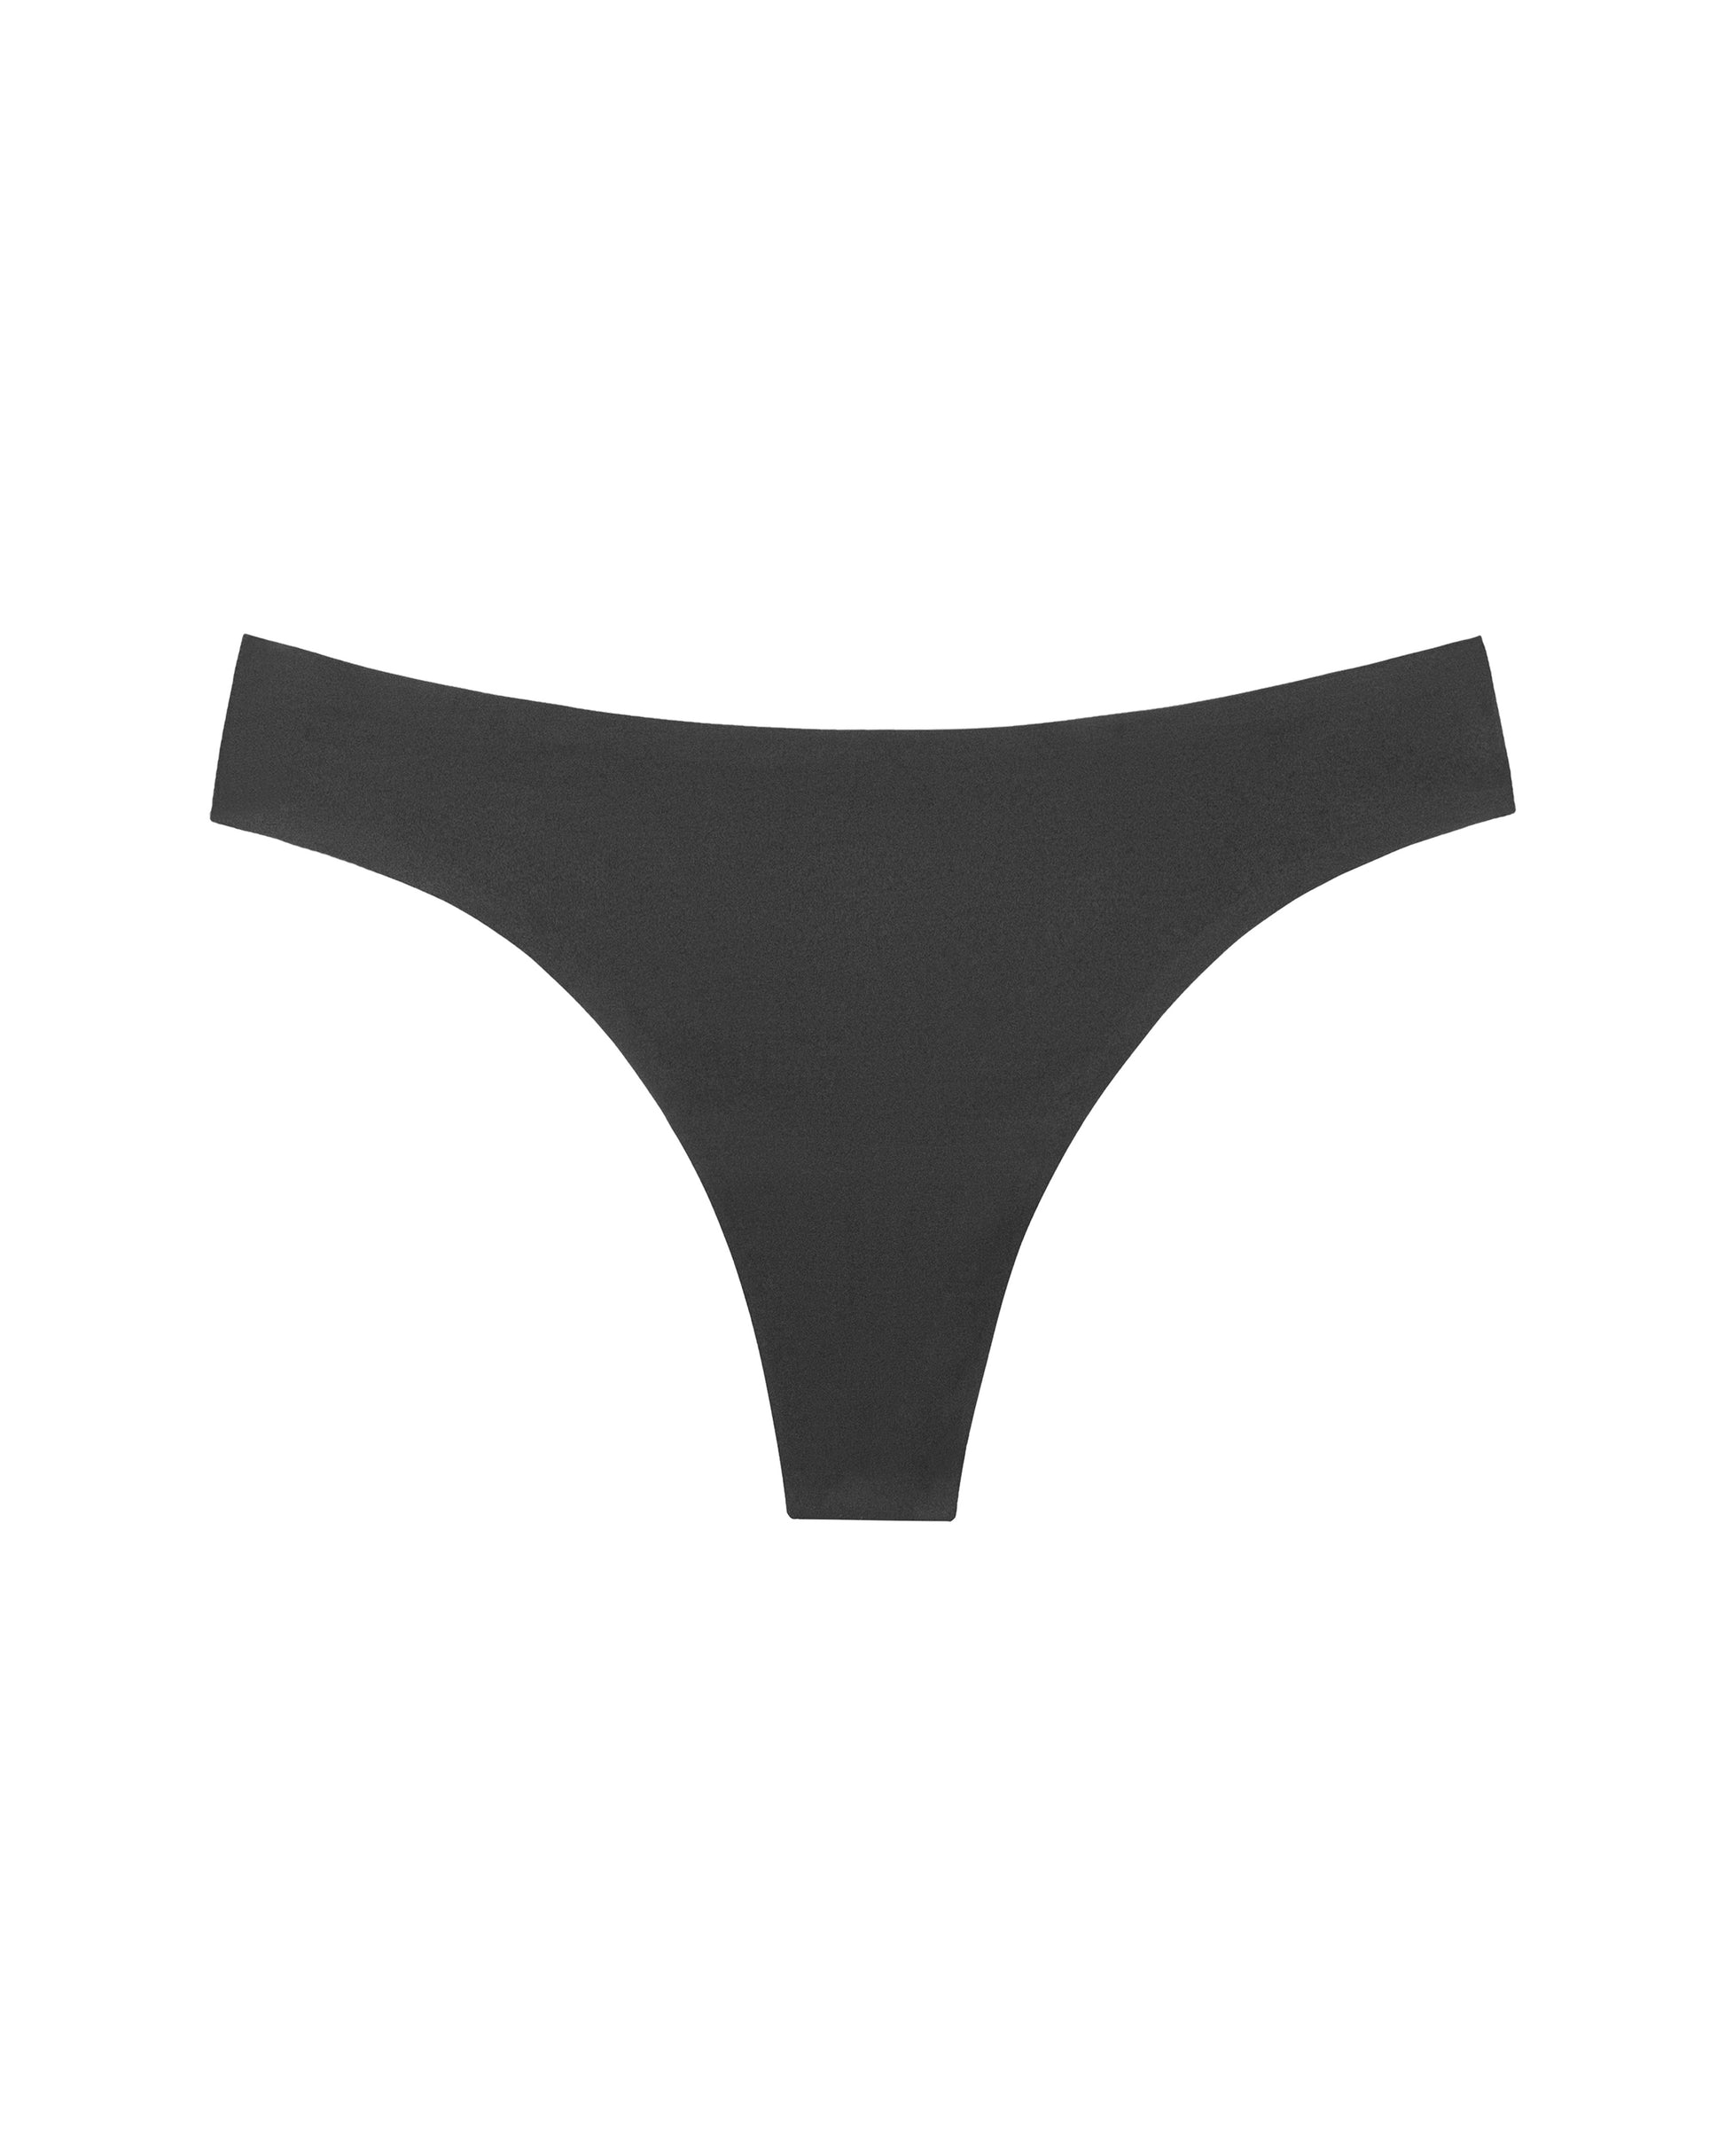 Proof Period Leakproof Thong – Bra Fittings by Court